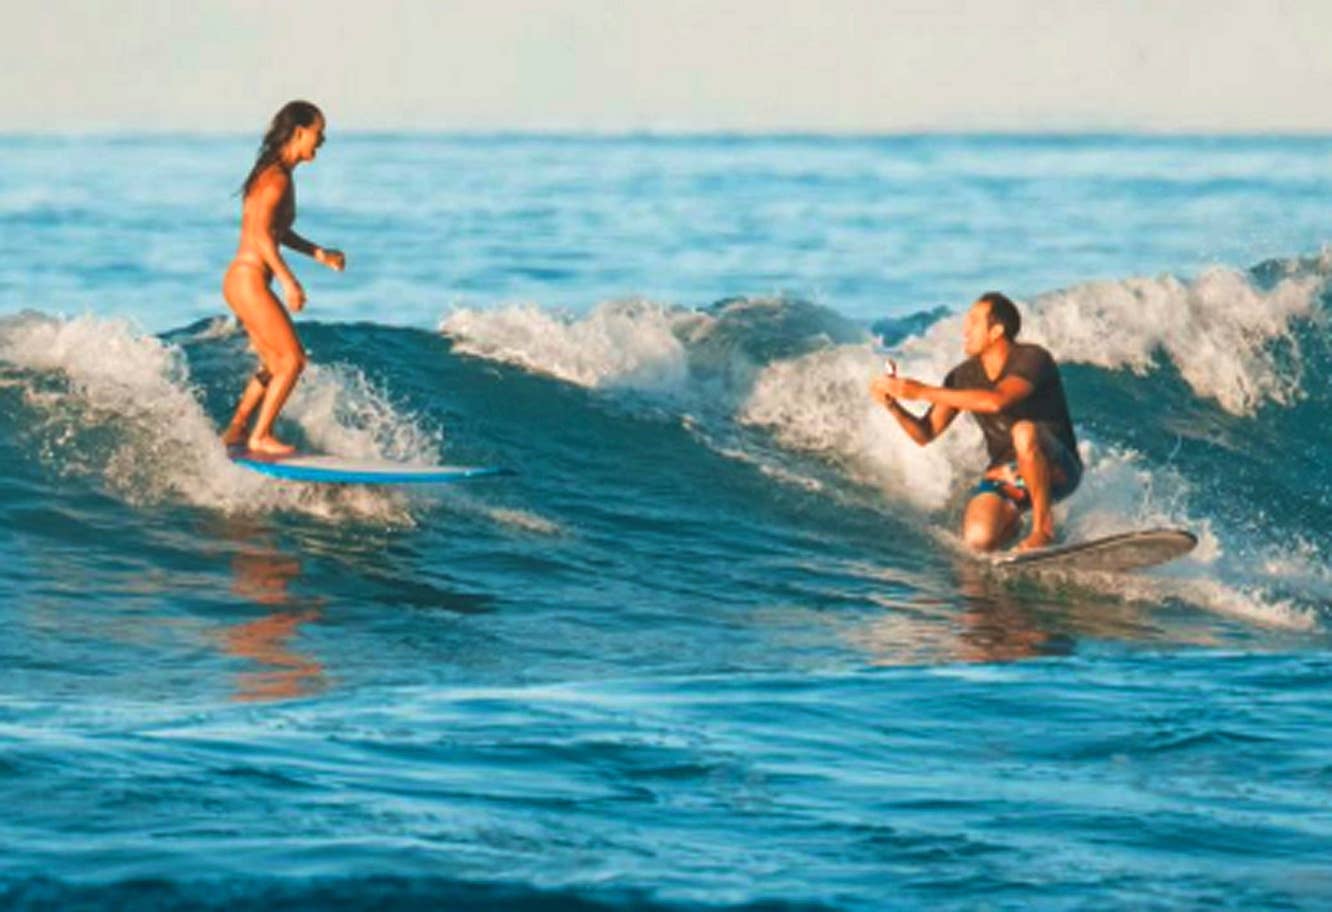 proposal while surfing